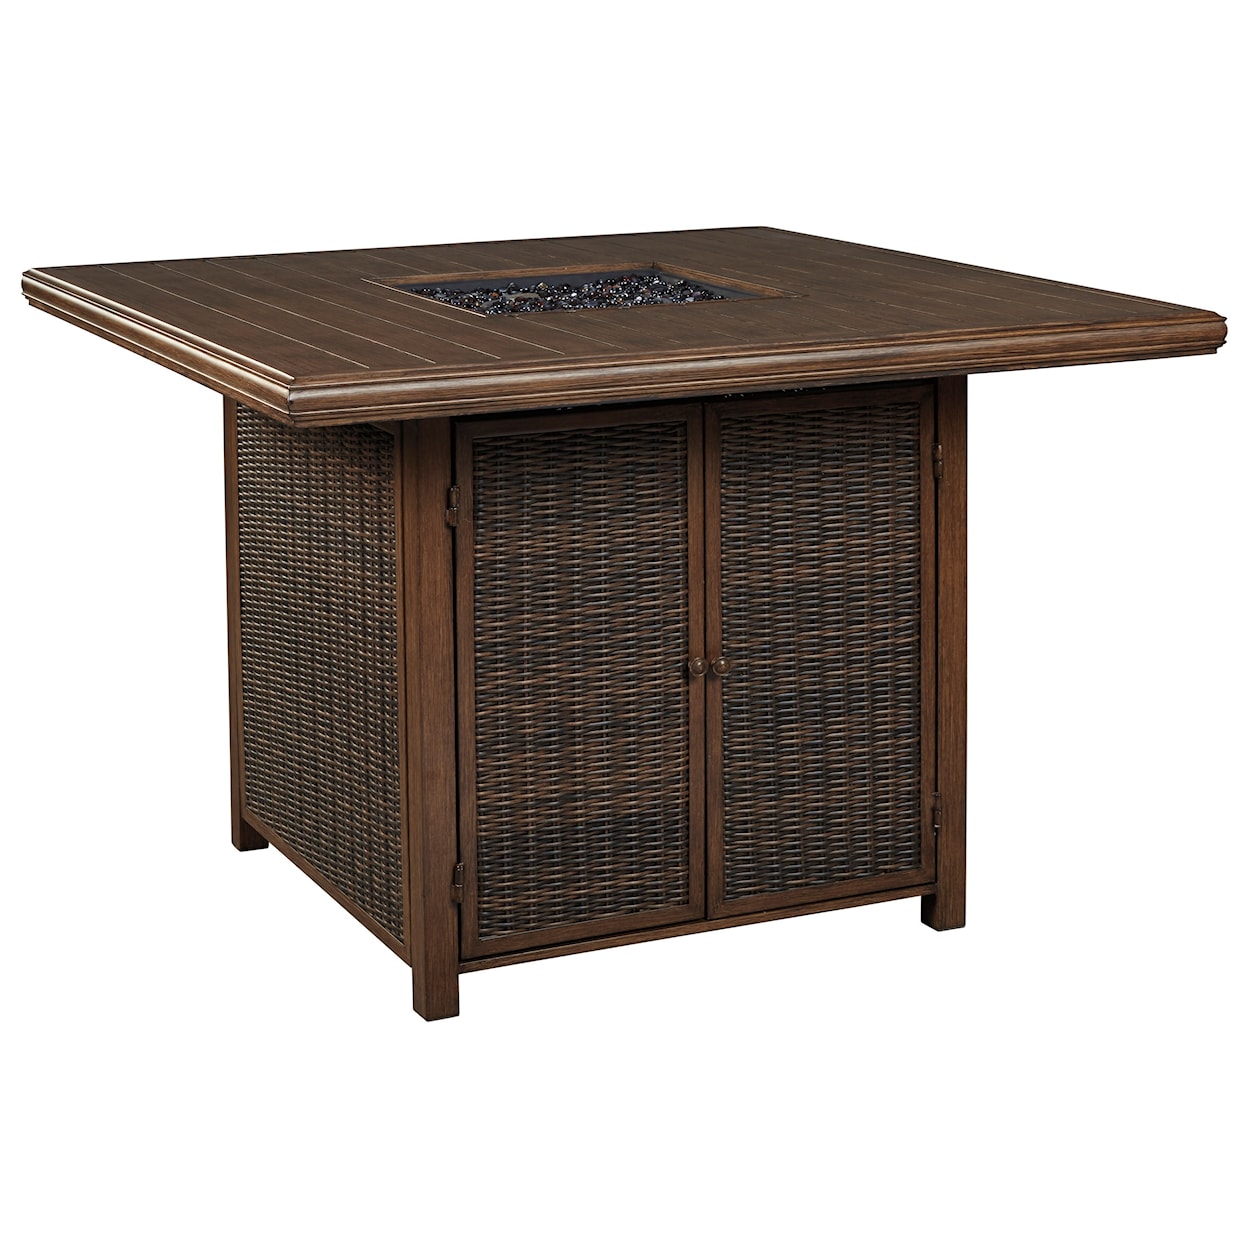 Signature Design Paradise Trail Square Bar Table with Fire Pit